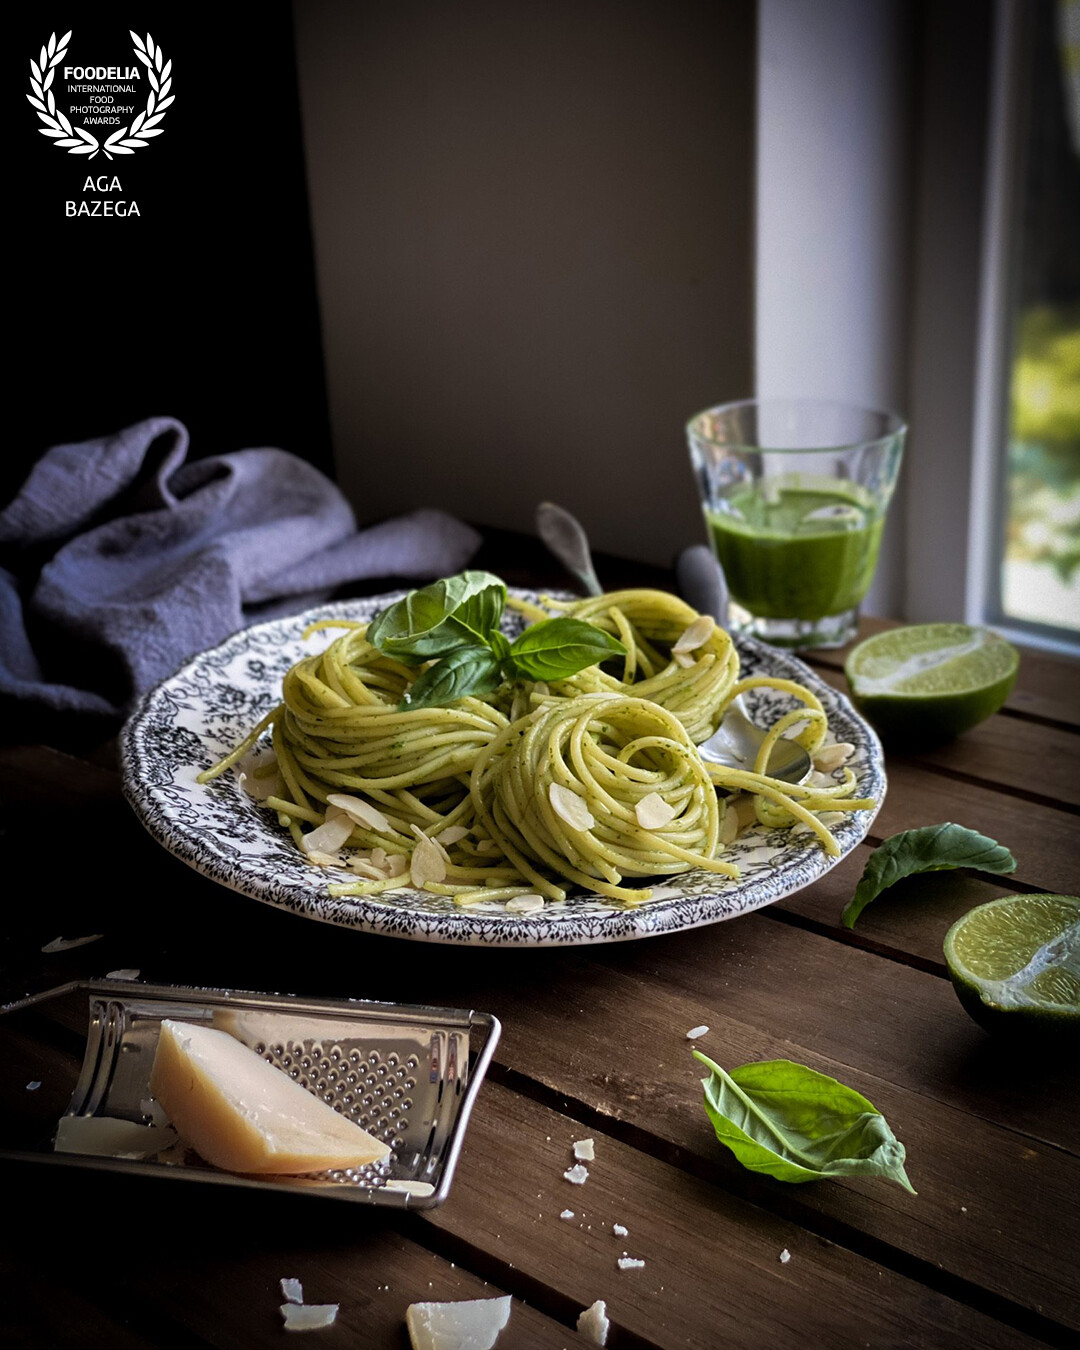 Basil pesto pasta, image created for a photography contest.